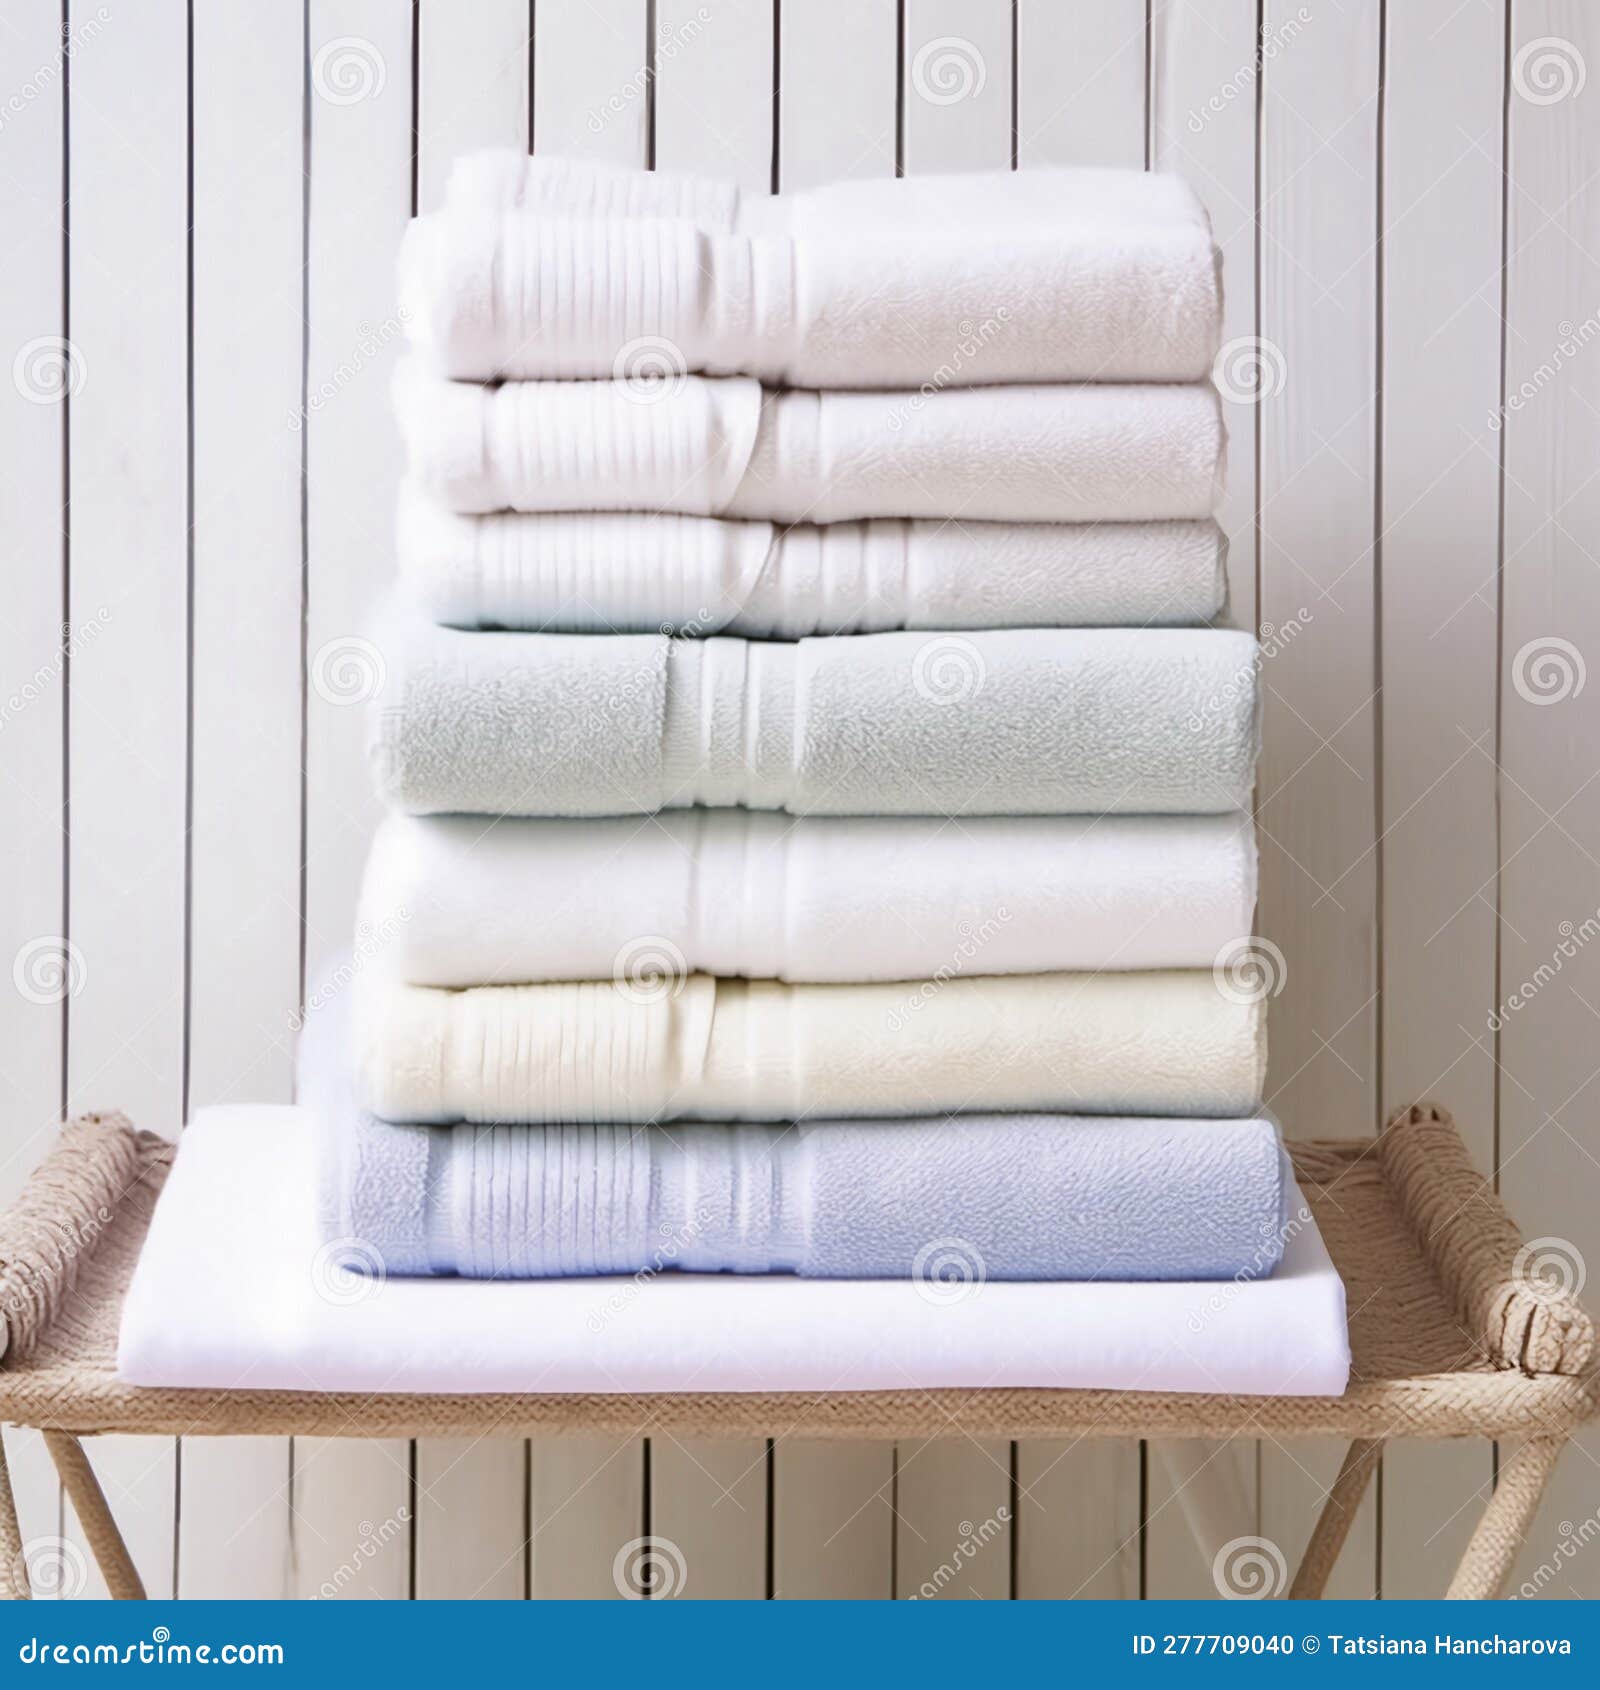 Stack Of Folded Towelsbathroom Objectsbody Care Items Stock Photo -  Download Image Now - iStock